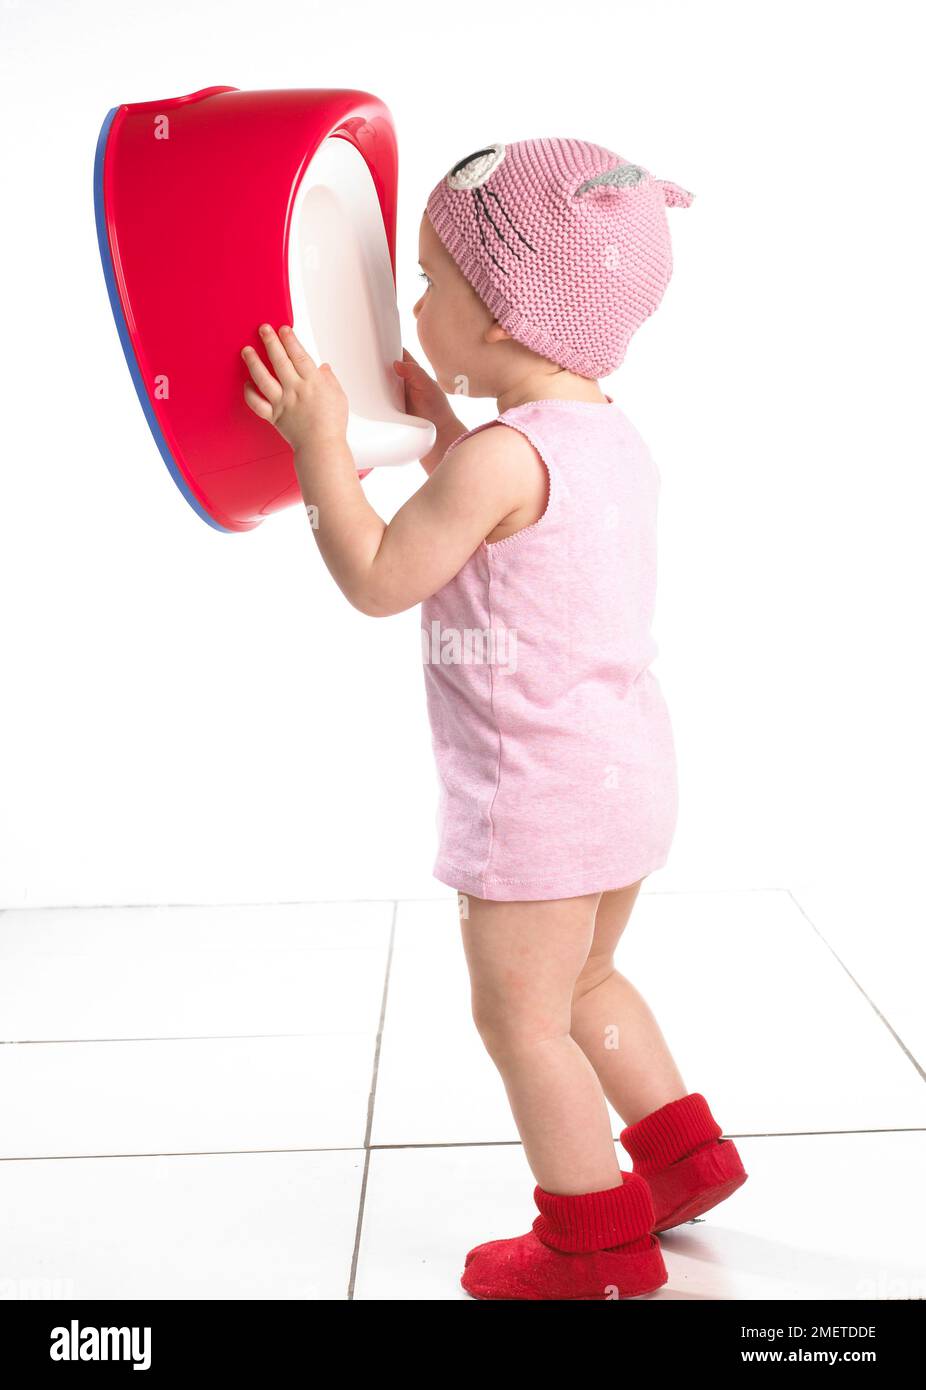 Girl standing wearing red socks, pink top and pink wool hat holding a red potty at face level, 19 months Stock Photo